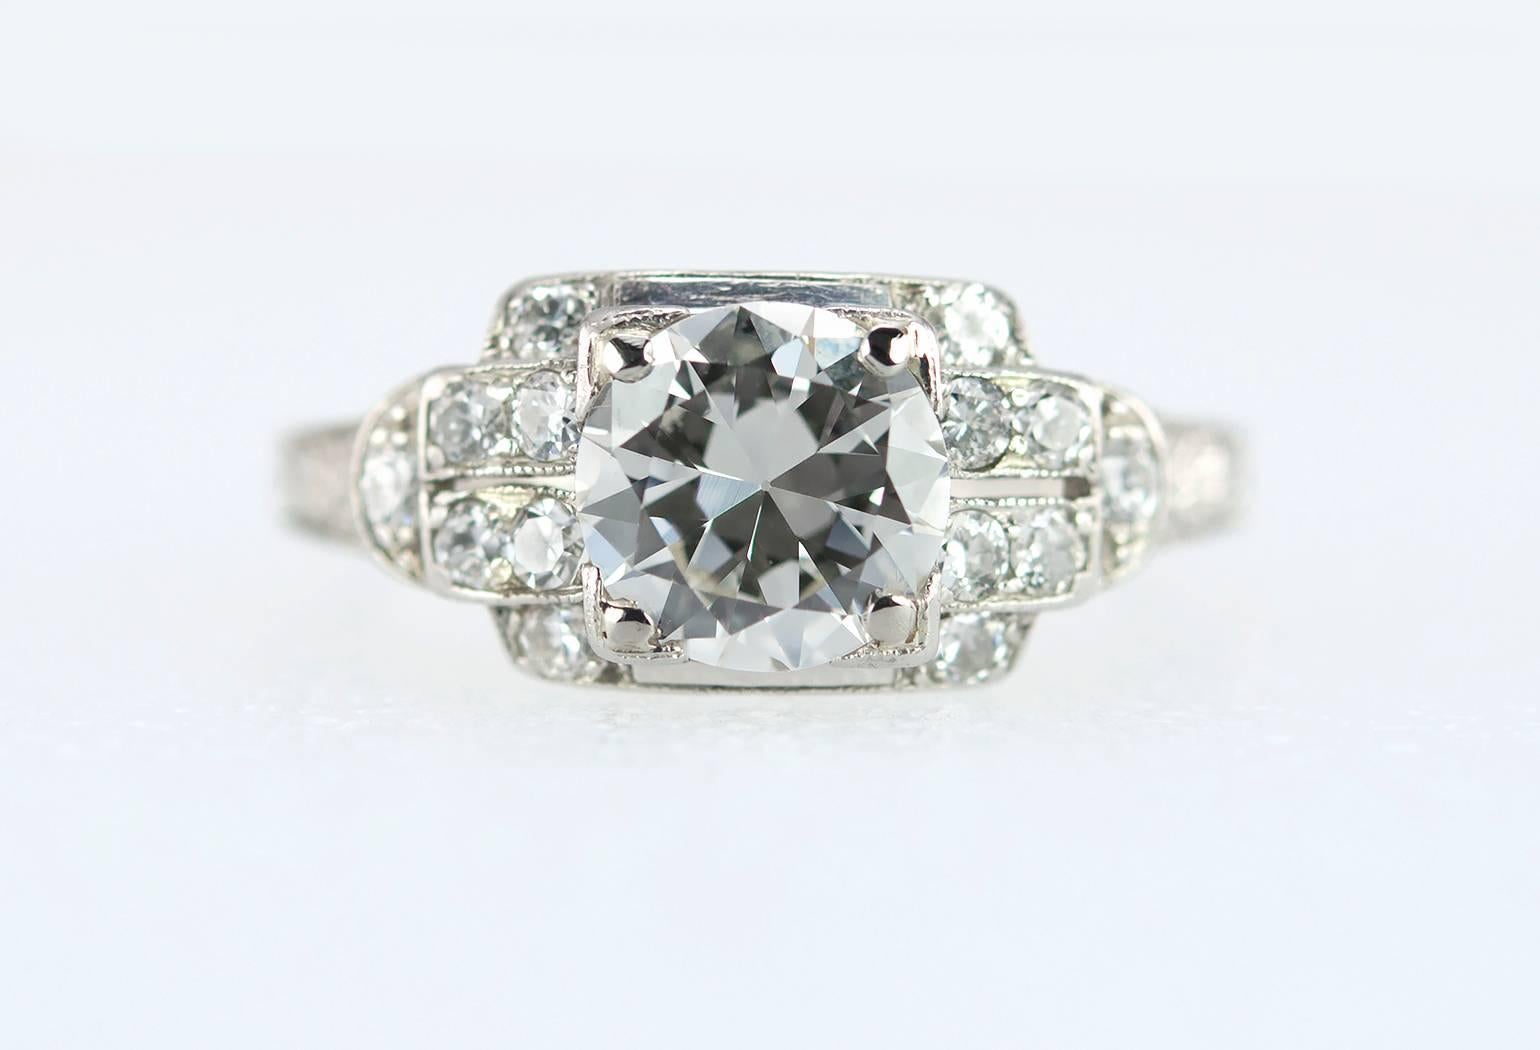 An Art Deco diamond and platinum engagement ring from circa 1930.  This beautiful ring features a 1.02 carat Old European Cut diamond center that is I in color and VS2 in clarity (per GIA certificate), which is bead set in a square mounting.  An